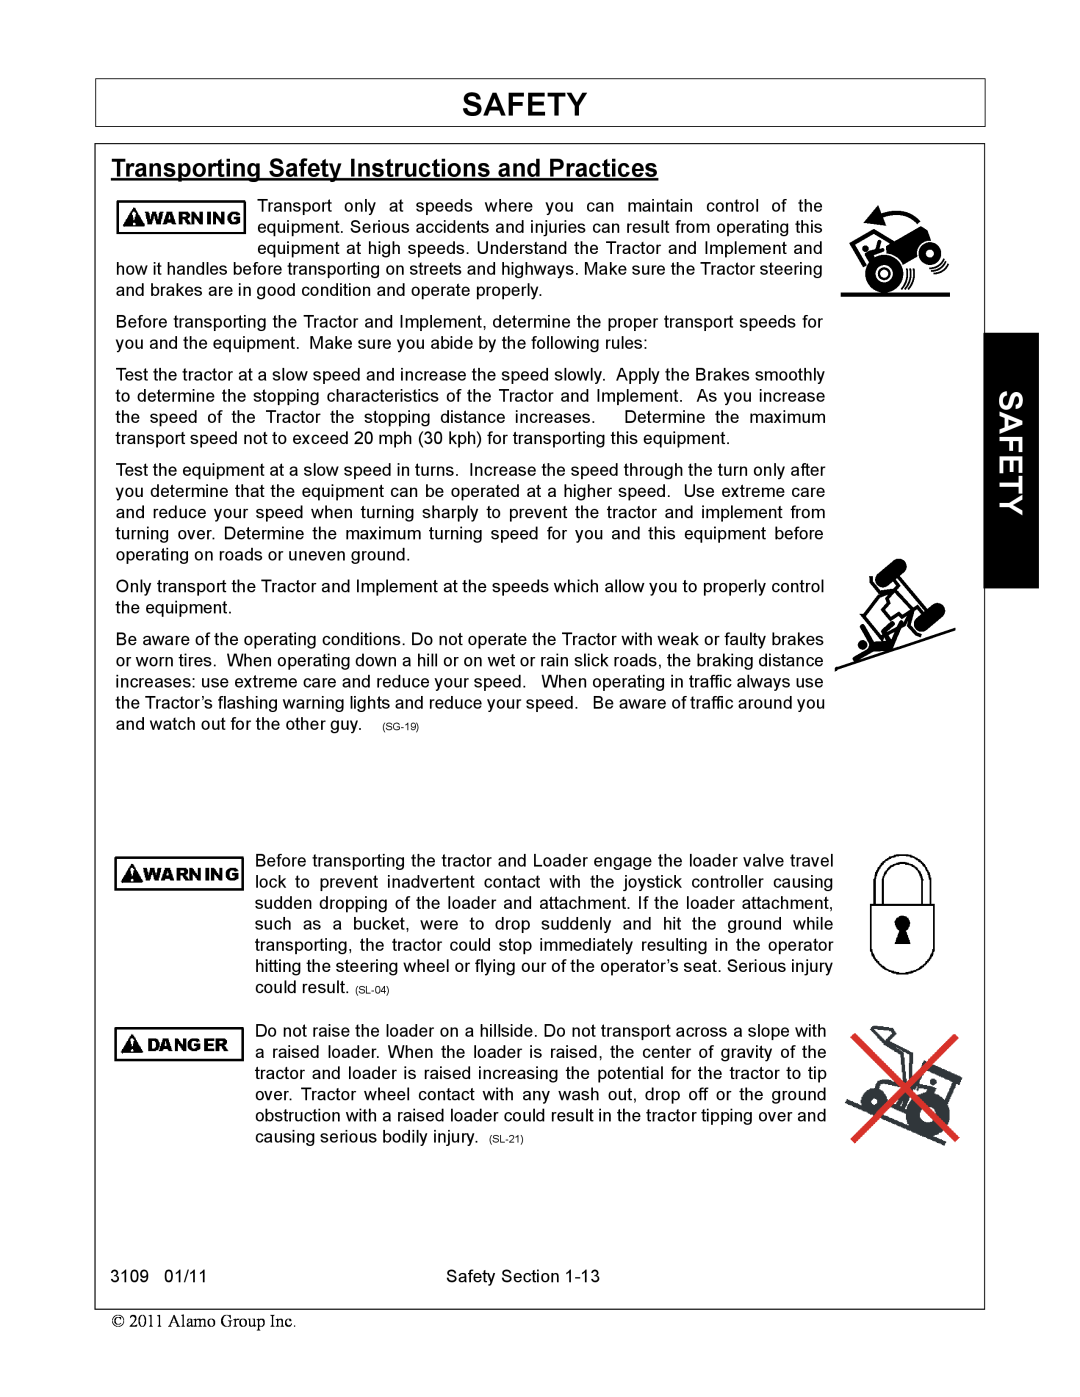 Alamo 3109 manual Transporting Safety Instructions and Practices 